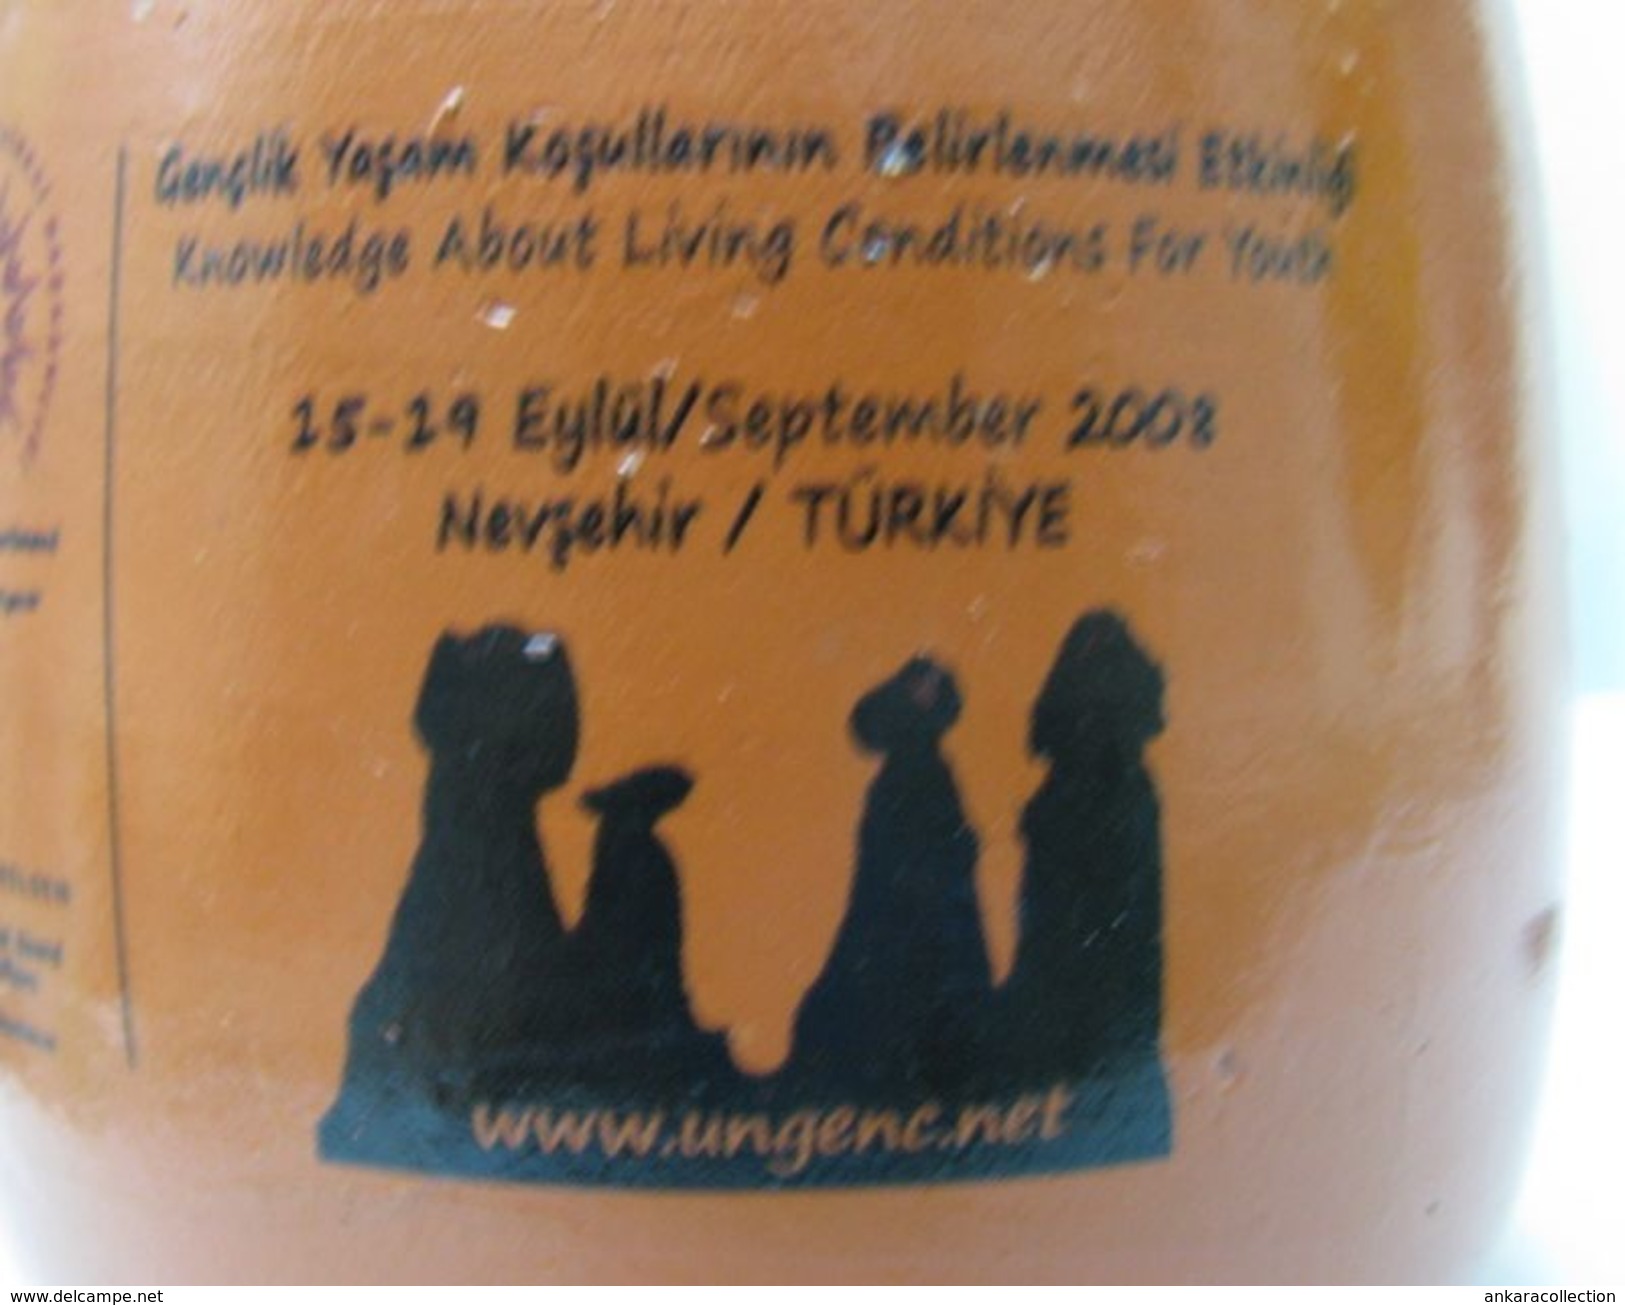 AC-  KNOWLEDGE ABOUT LIVING CONDITIONS FOR YOUTH 15 - 19 SEPTEMBER 2008 NEVSEHIR TURKEY SWEDISH NATIONAL BOARD FOR YOUTH - Tasses